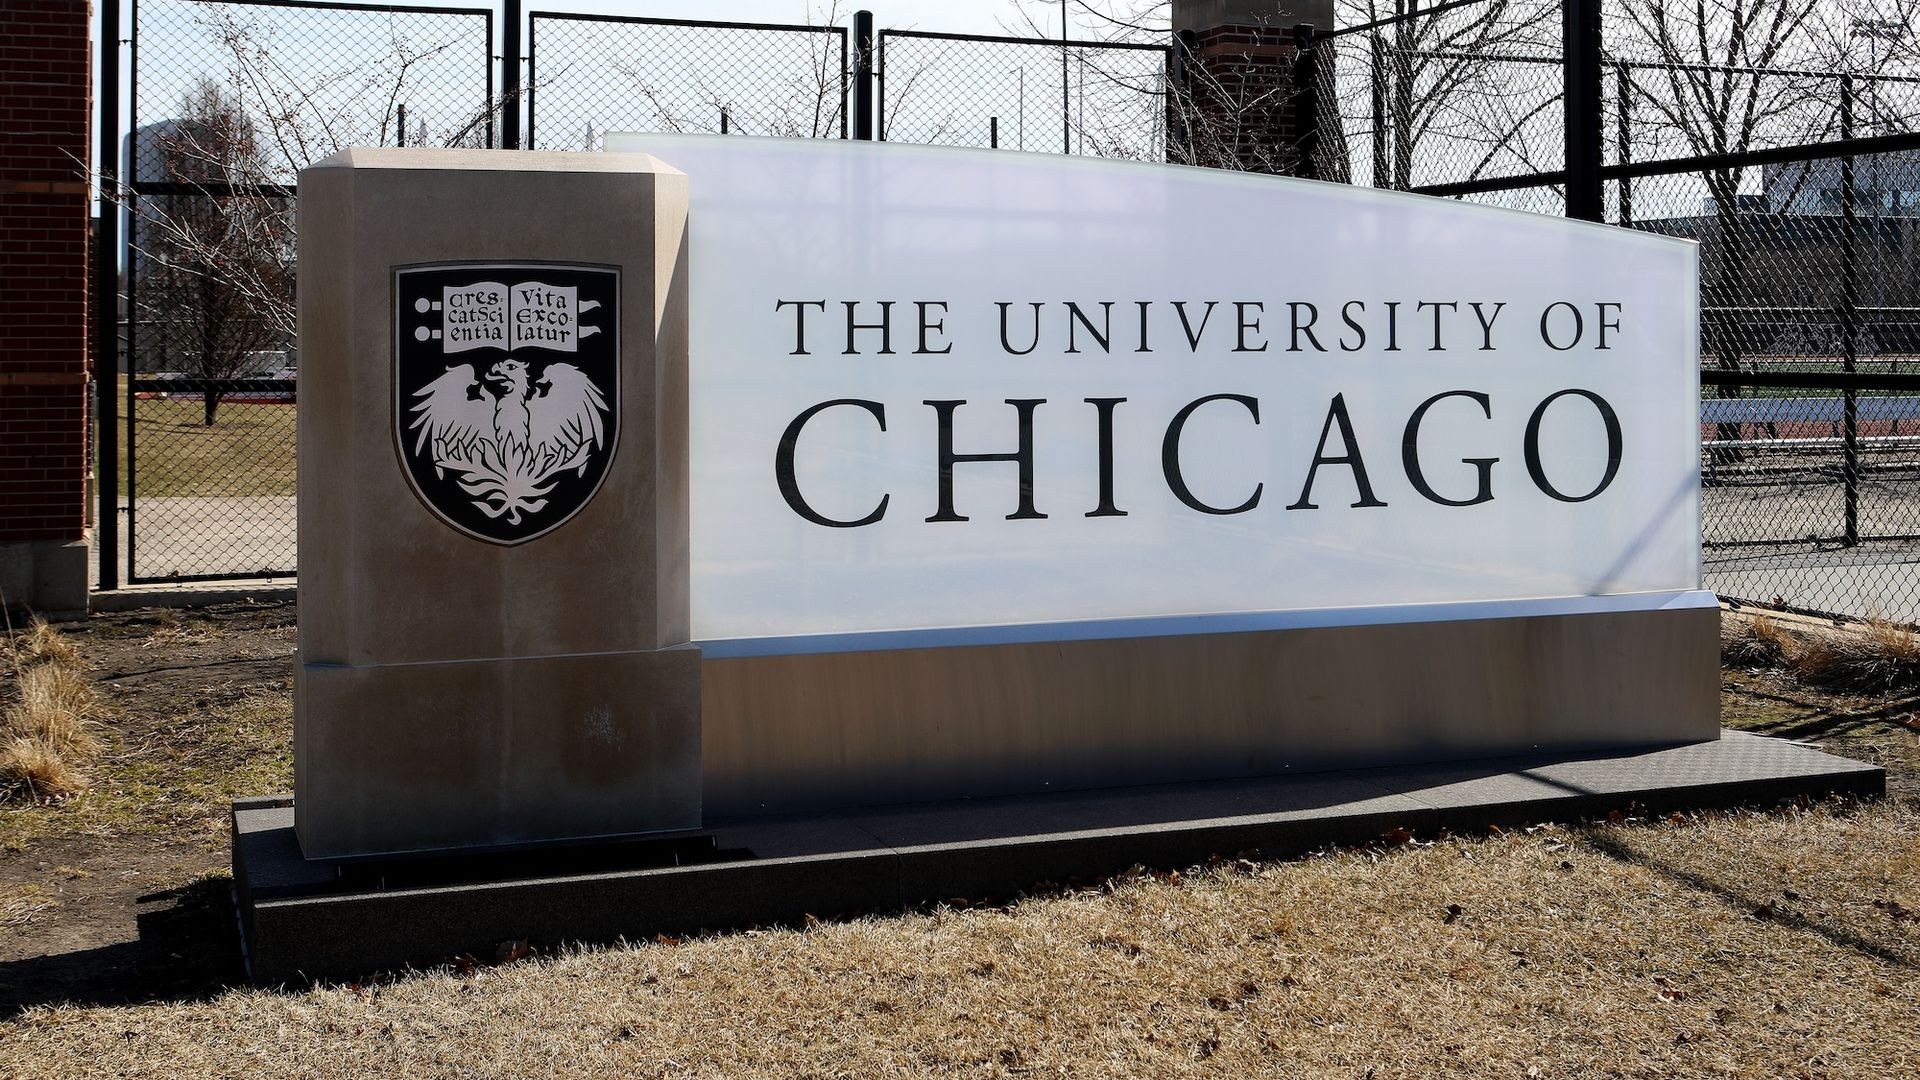 The University of Chicago sign.